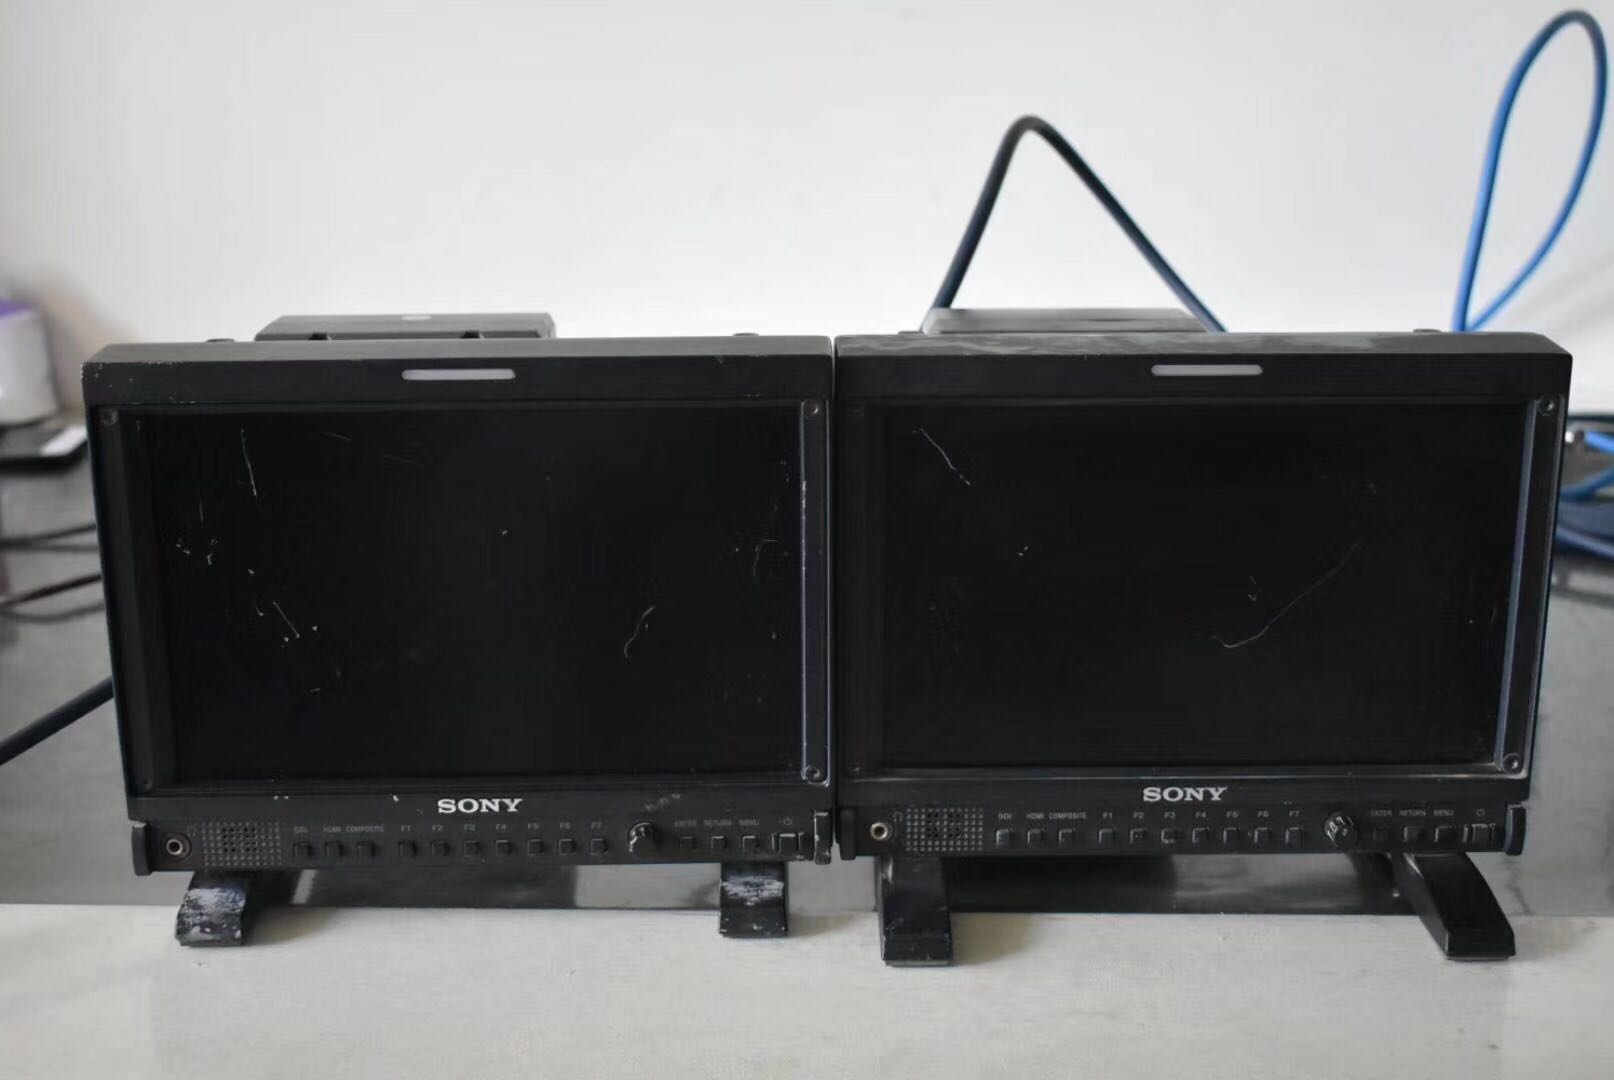  Sold second-hand Sony LMD-940W, 9-inch widescreen monitor